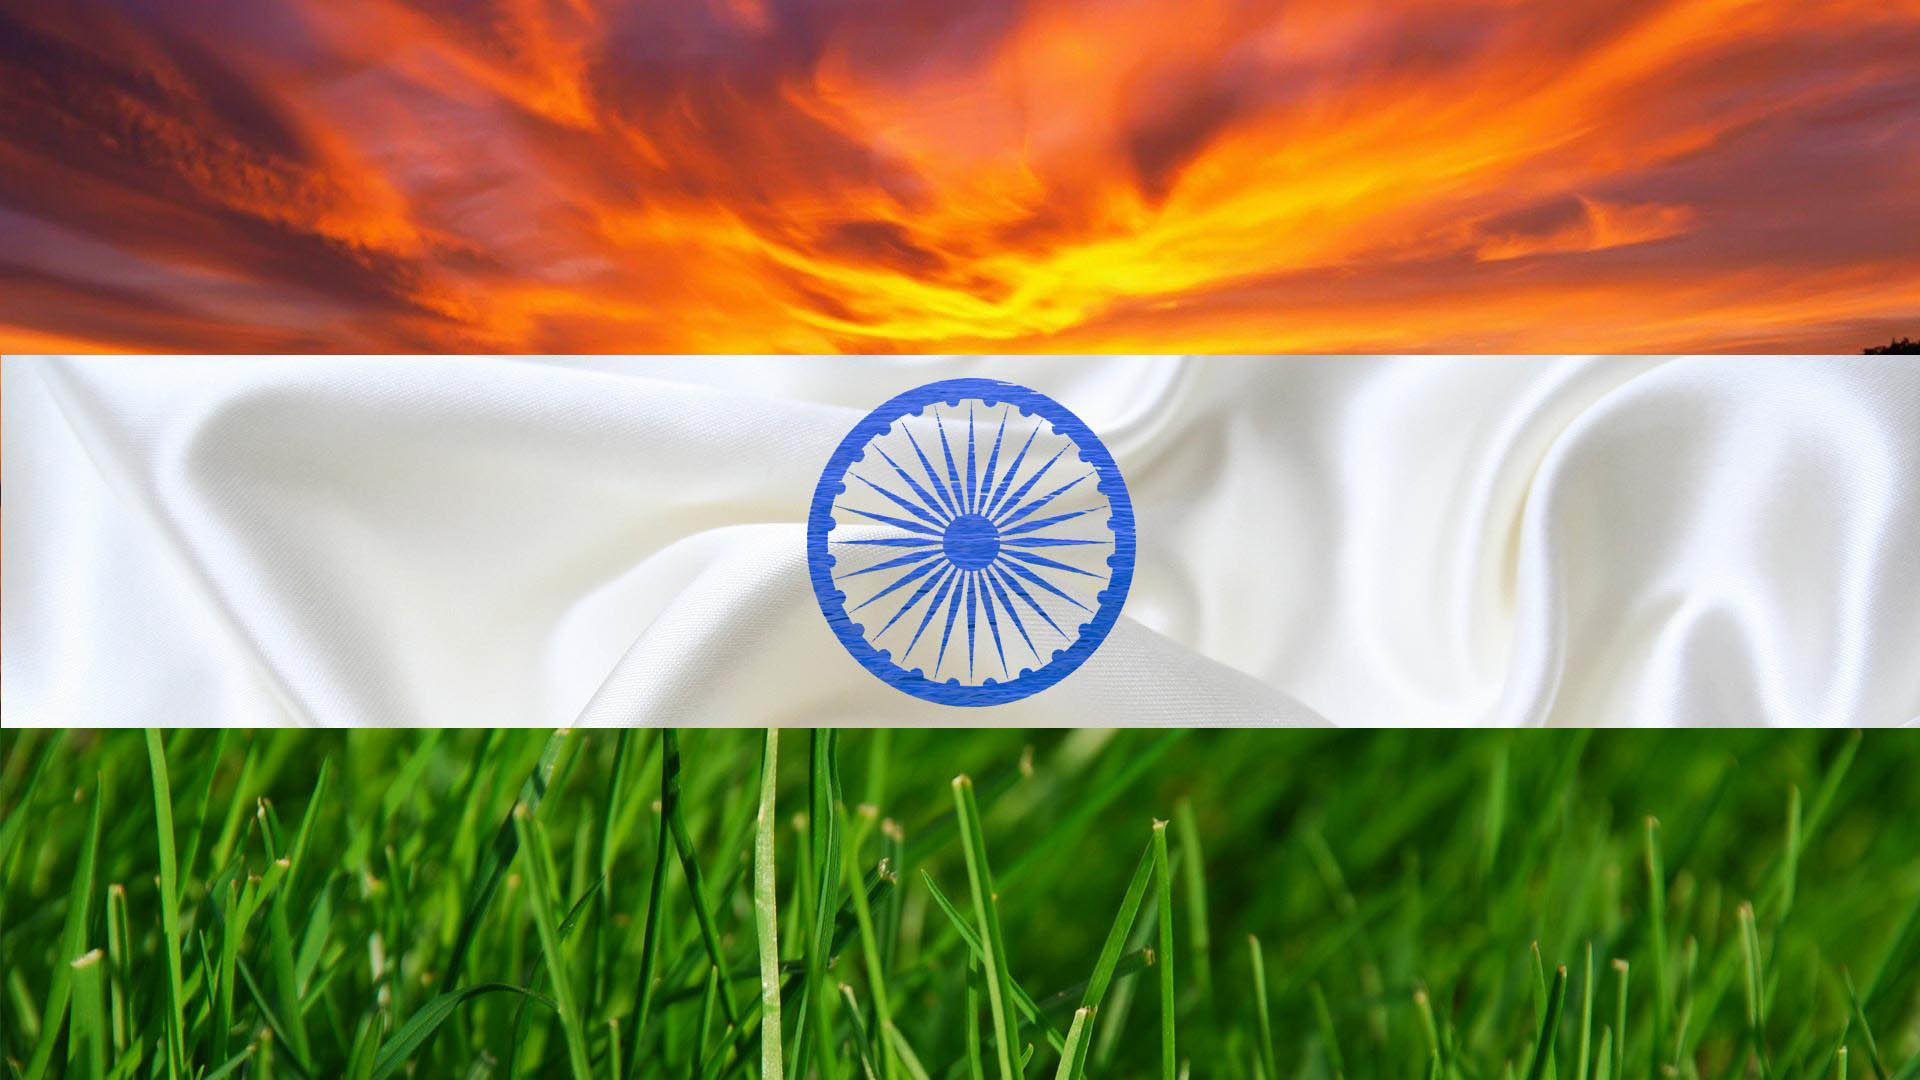 Happy independence day indian flag with ashok chakra hd wallpaper.